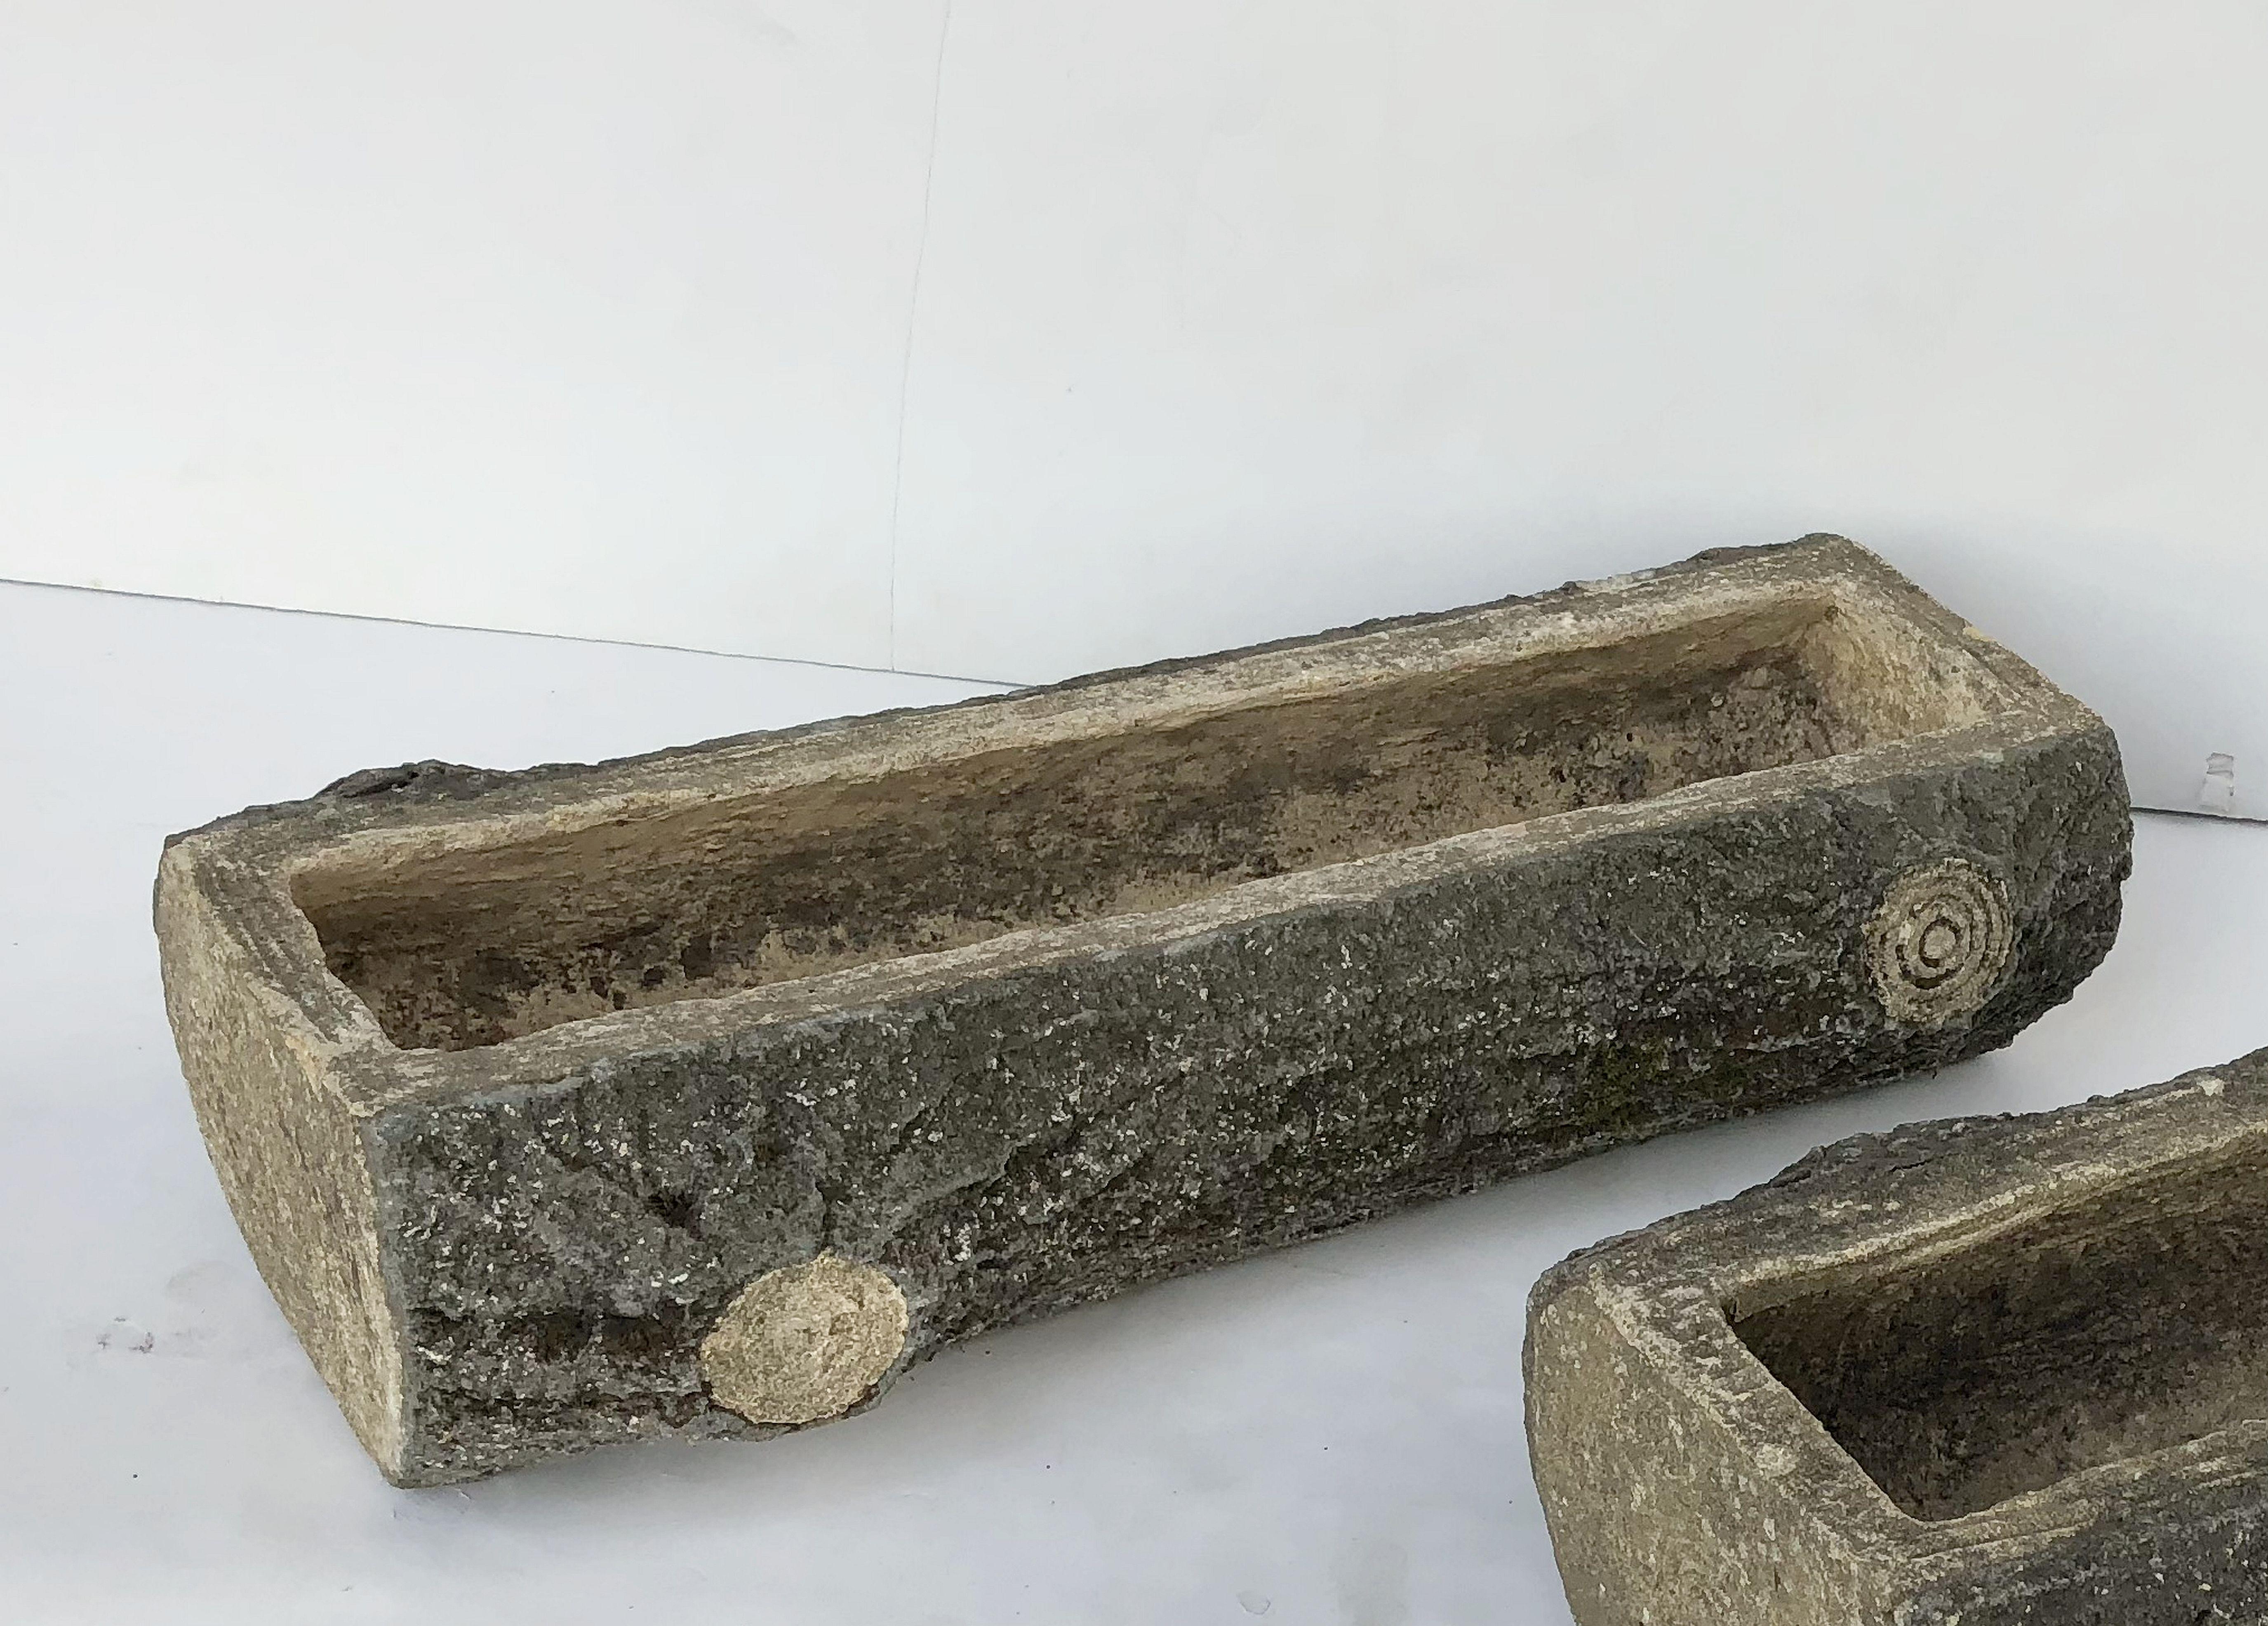 A fine English garden stone faux bois log planter, featuring the look of a hollowed half-log, of composition stone.

A perfect addition to an indoor or outdoor garden room, garden, or conservatory!



Dimensions are:

H 6 inches x W 25 1/4